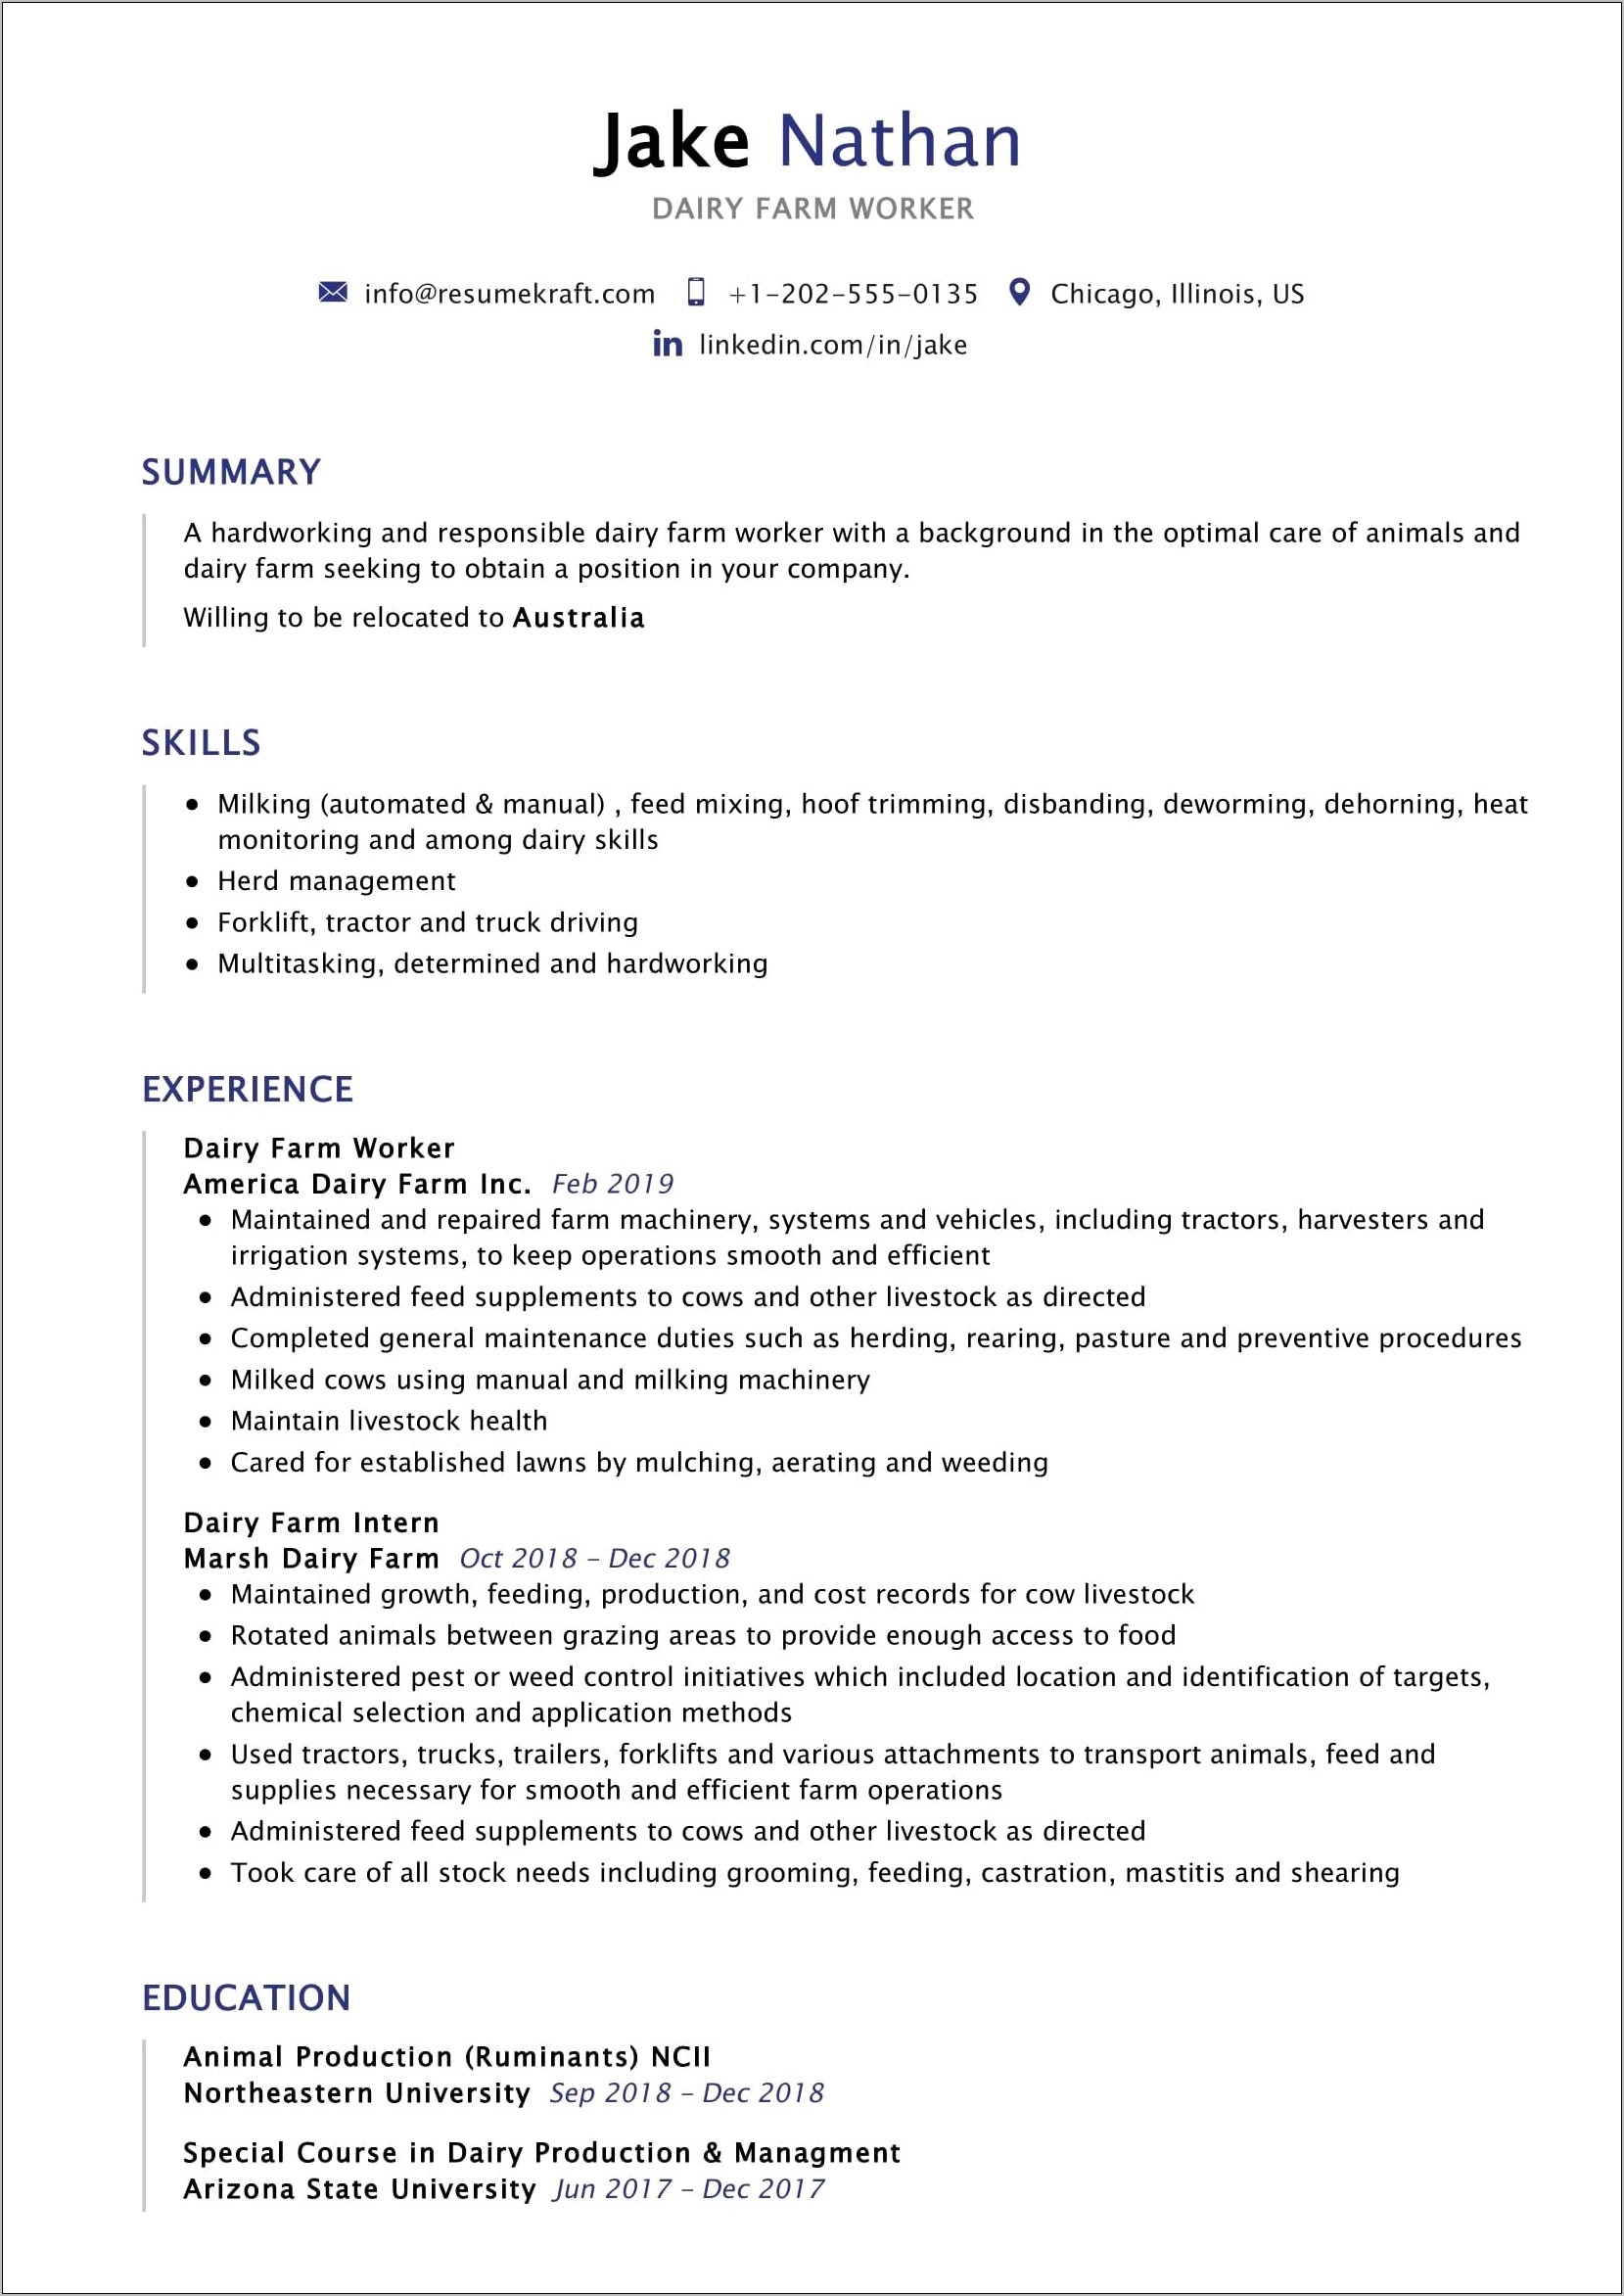 Resume Summary Examples General Labor